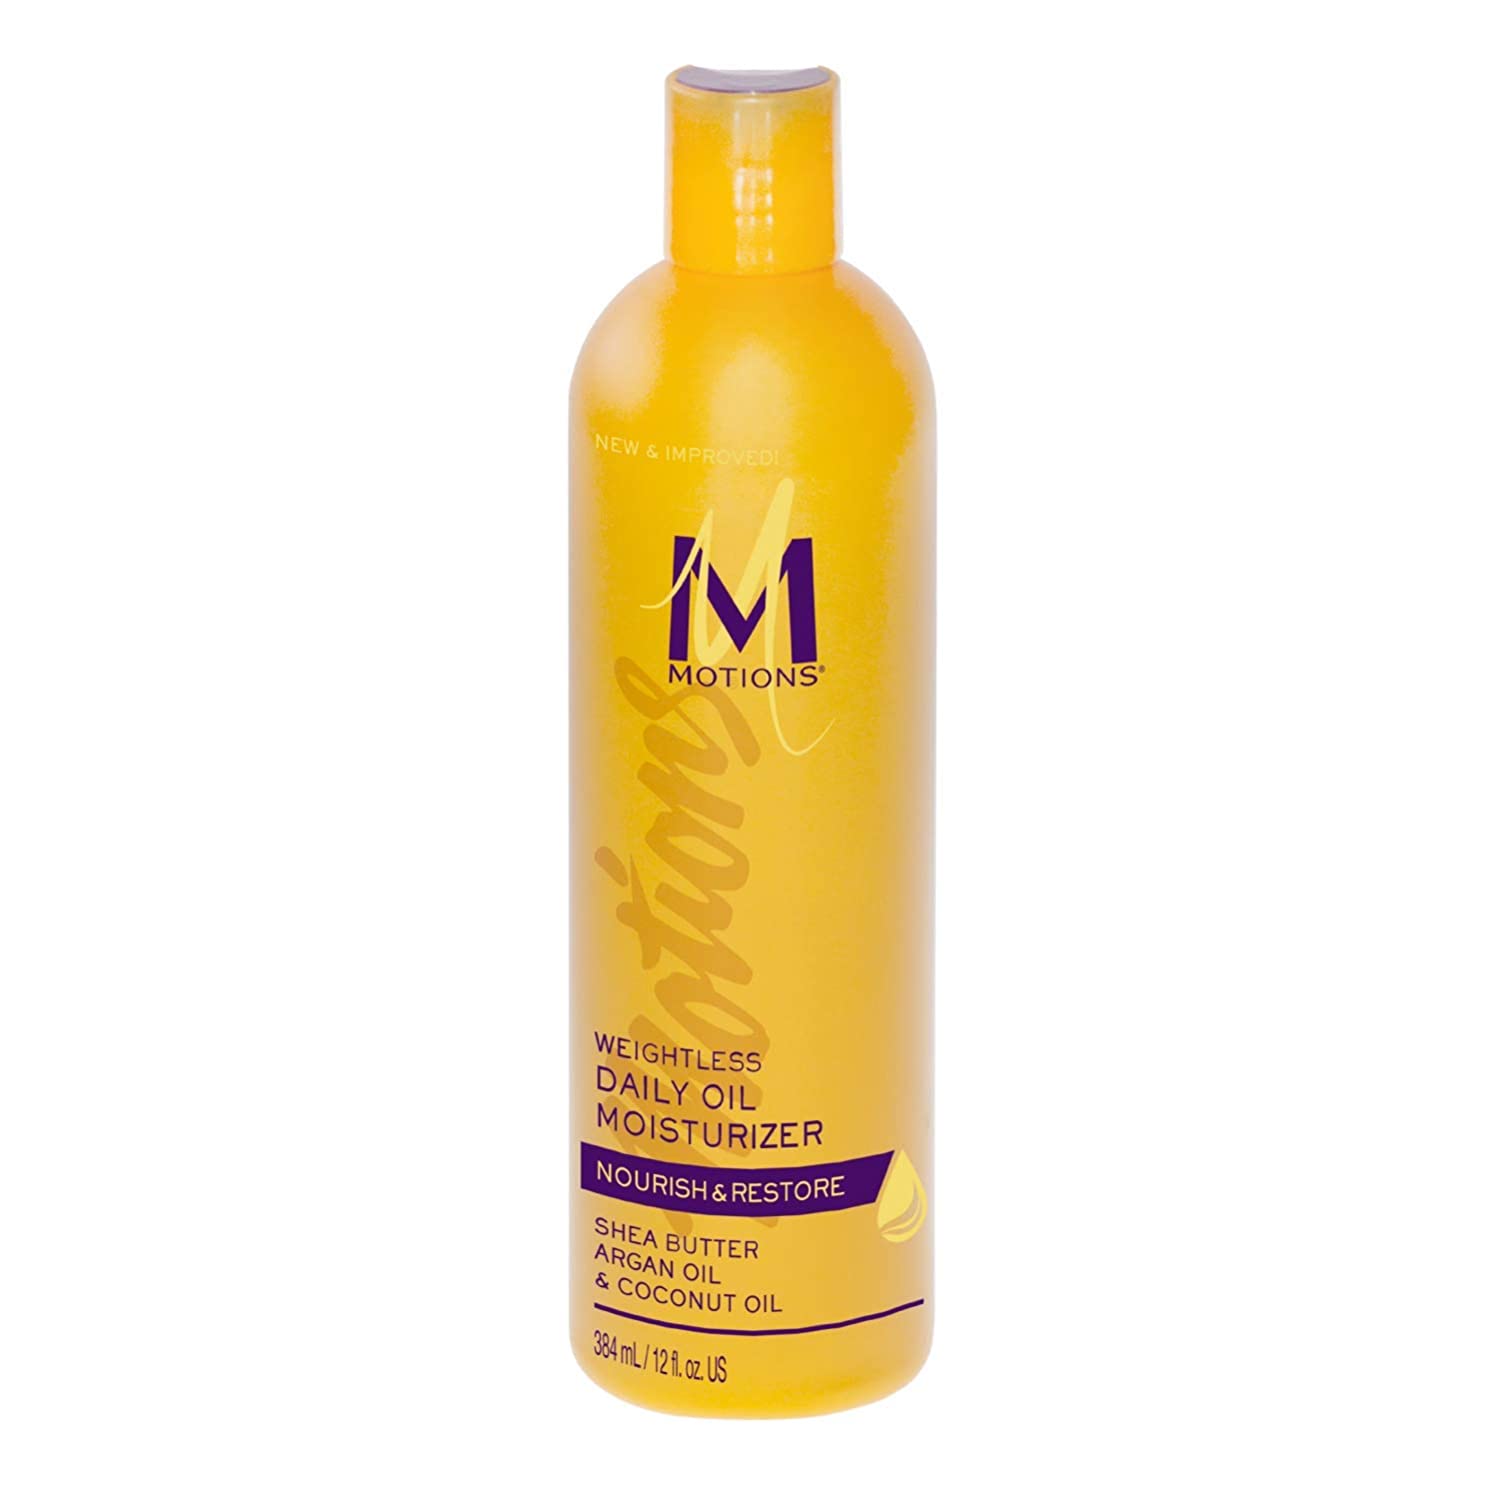 4th Ave Market: Motions Nourish & Restore Weightless Daily Oil Moisturizer, 12 Ounce